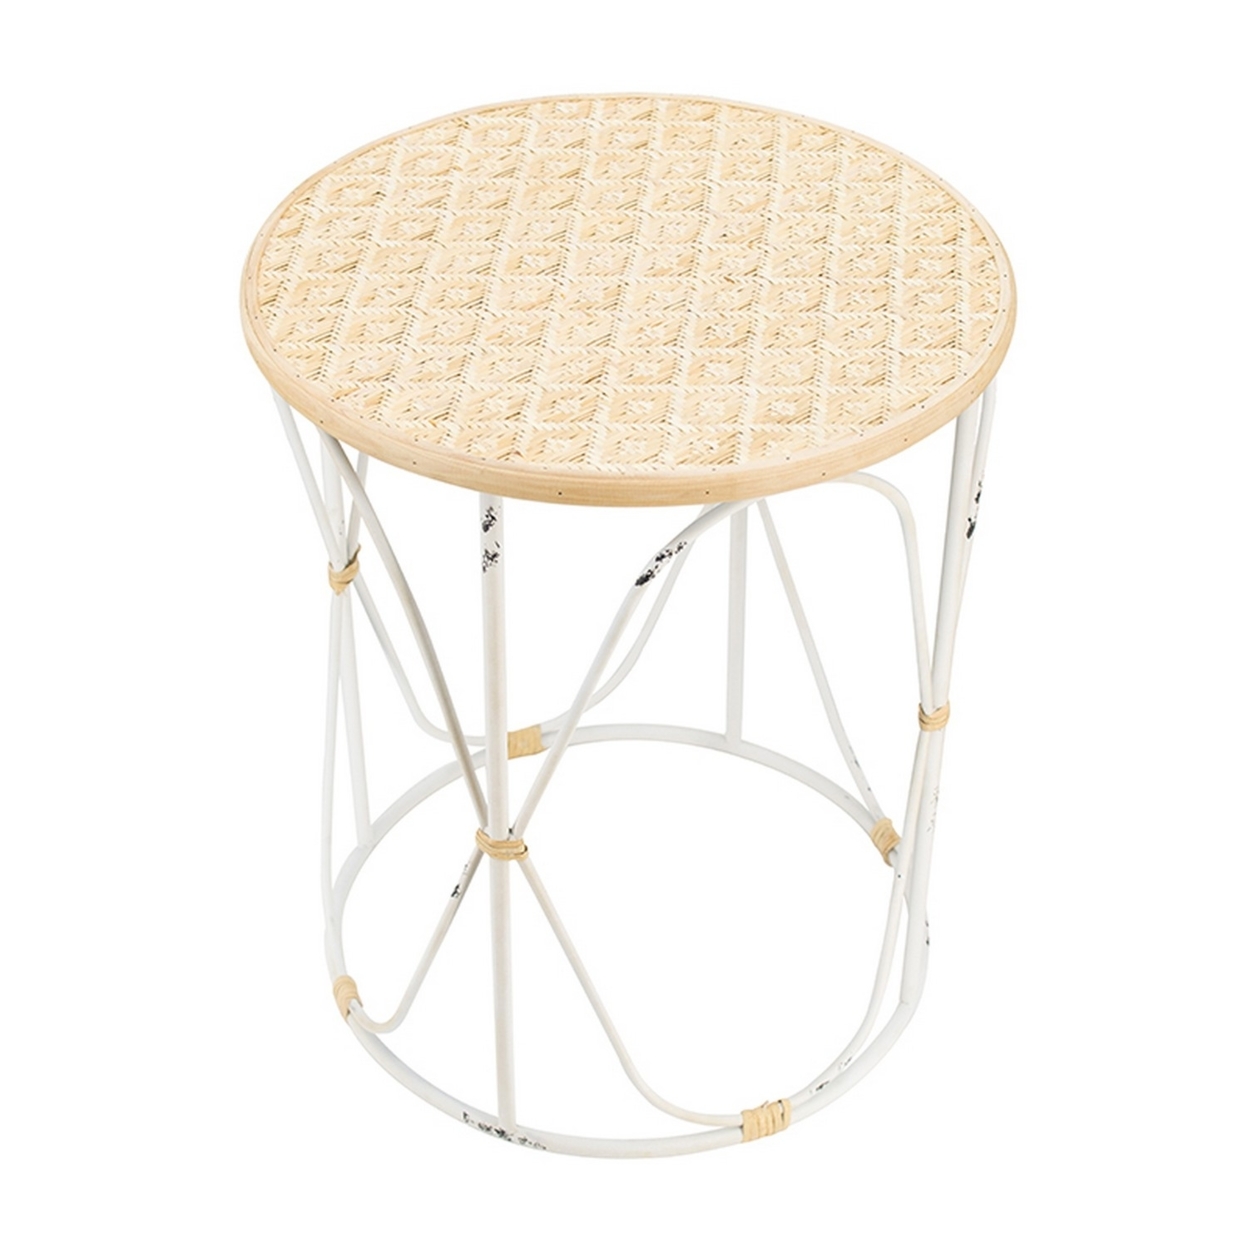 23, 20 Inch Round End Side Table, Set Of 2, Woven Bamboo Top, Brown, White- Saltoro Sherpi